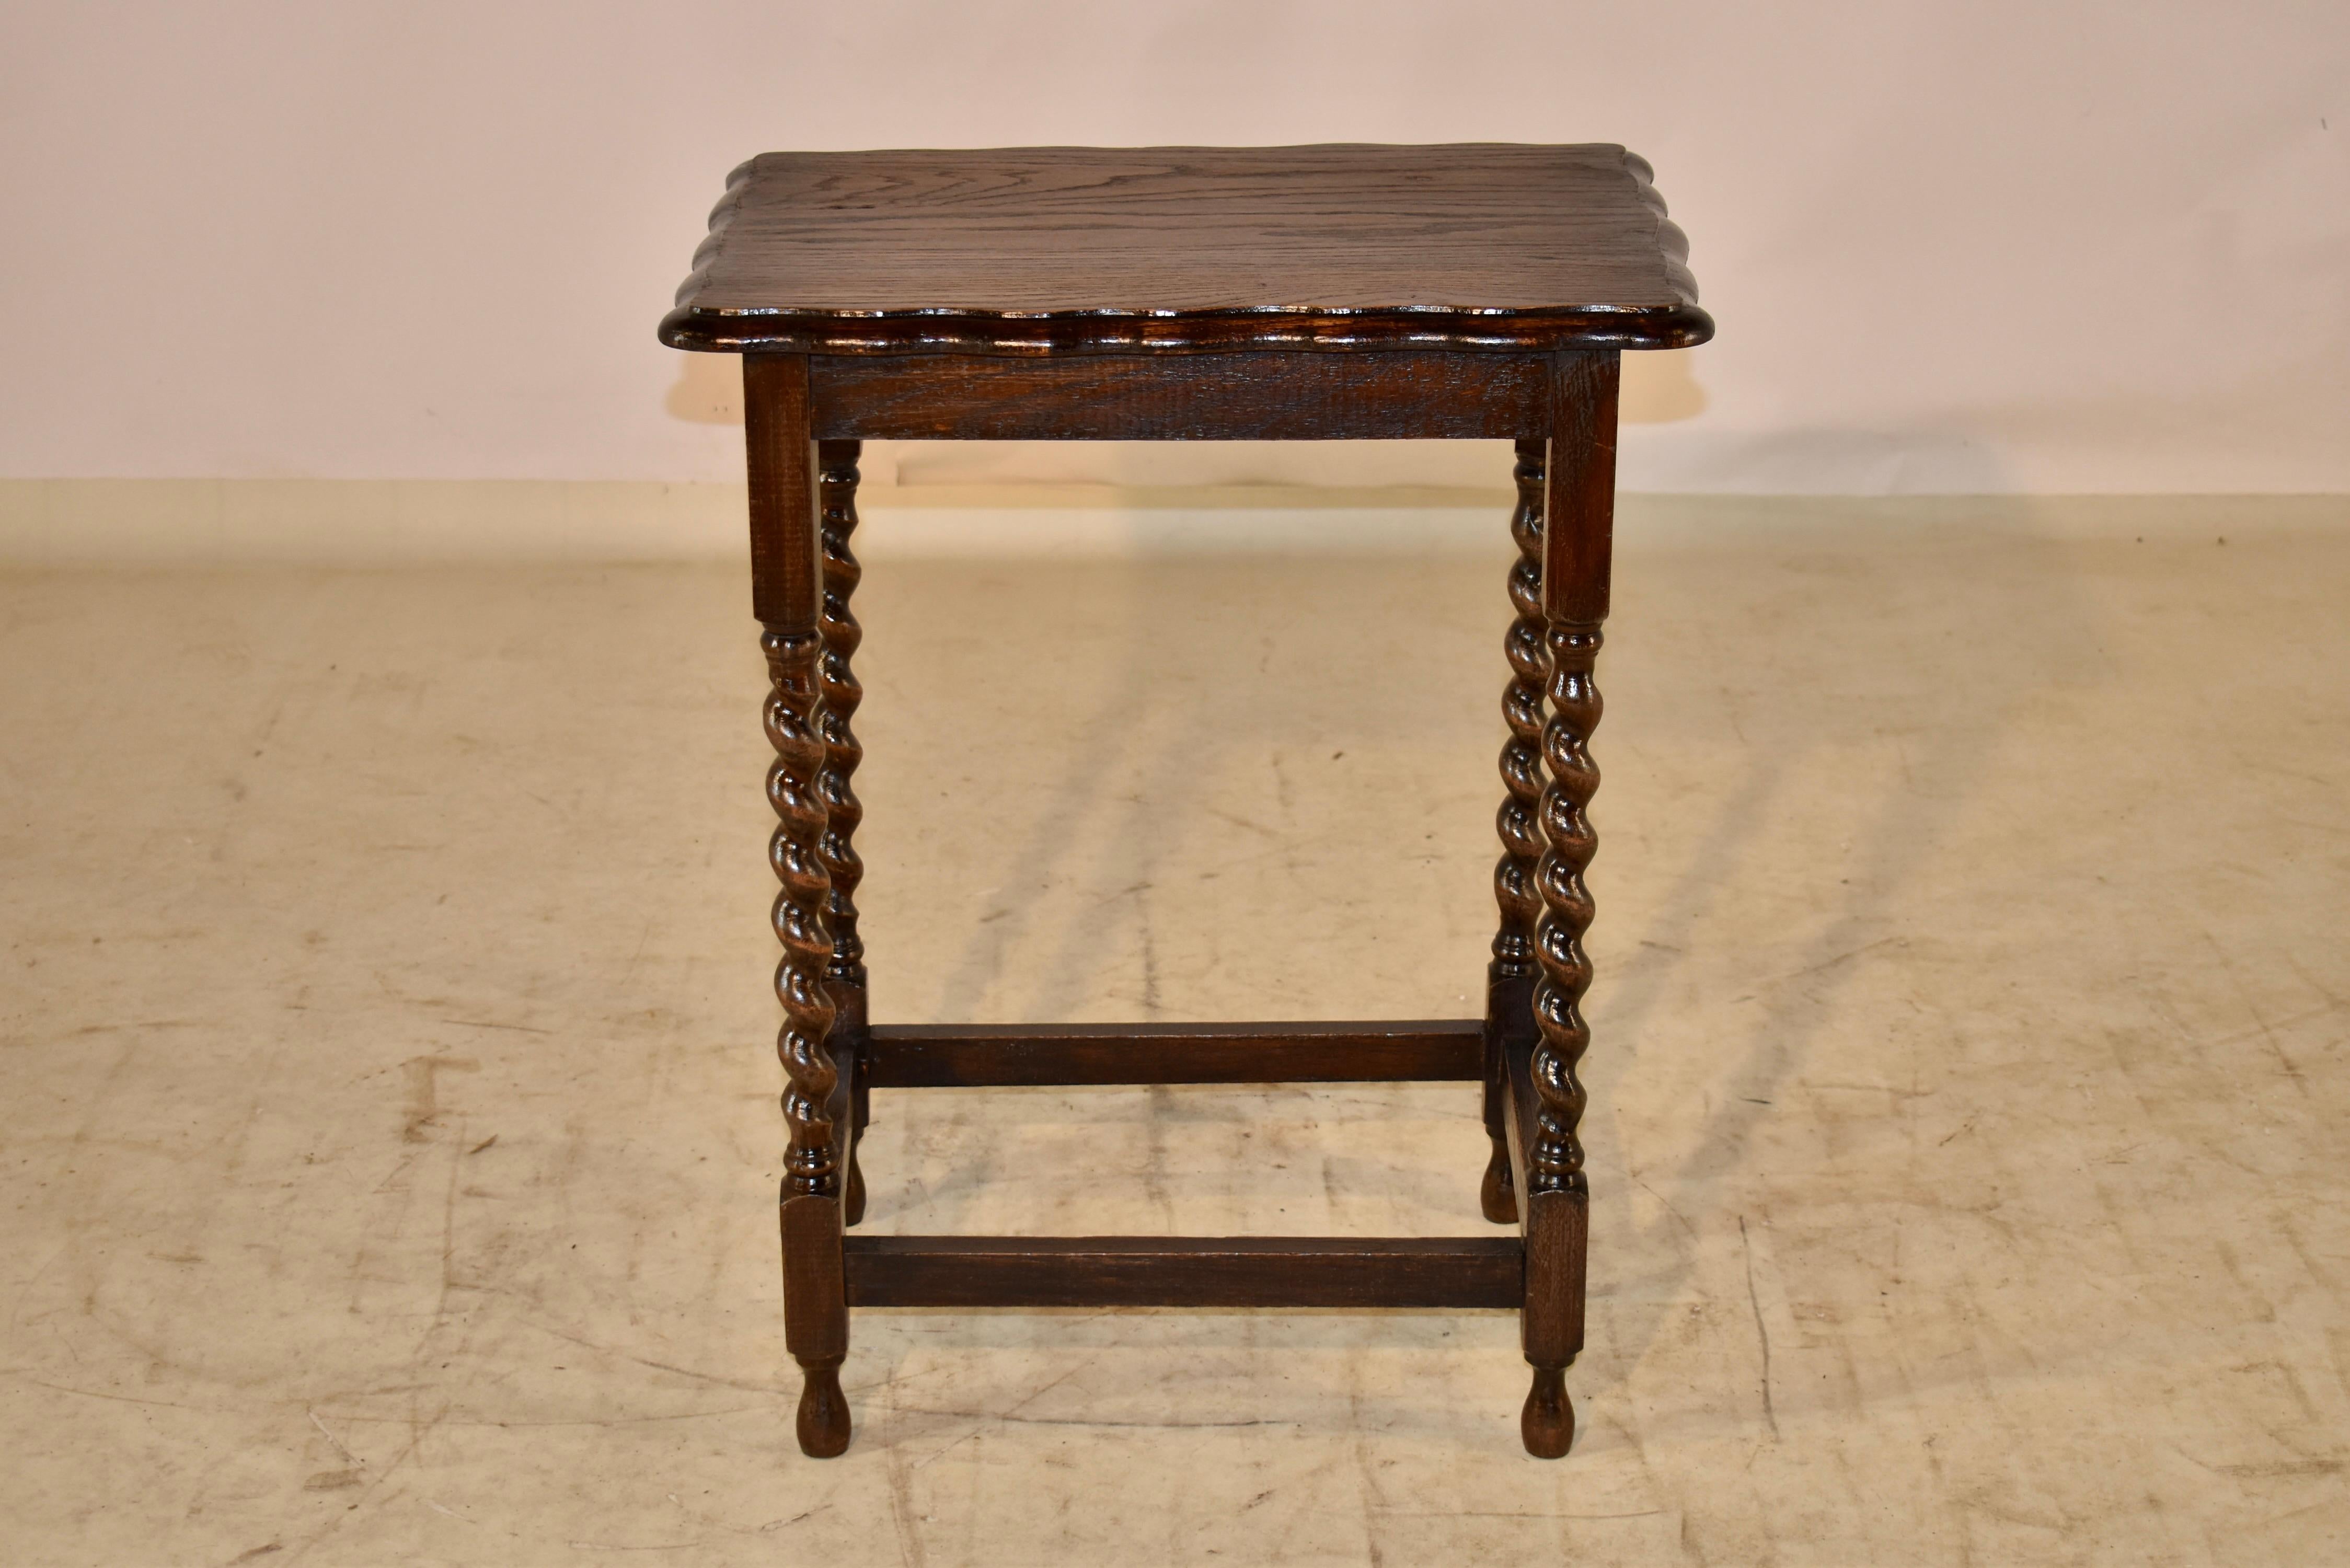 circa 1900 English oak side table with a beveled and scalloped edge around the top, following down to a simple apron and supported on hand turned barley twist legs, joined by simple stretchers and supported on hand turned feet.